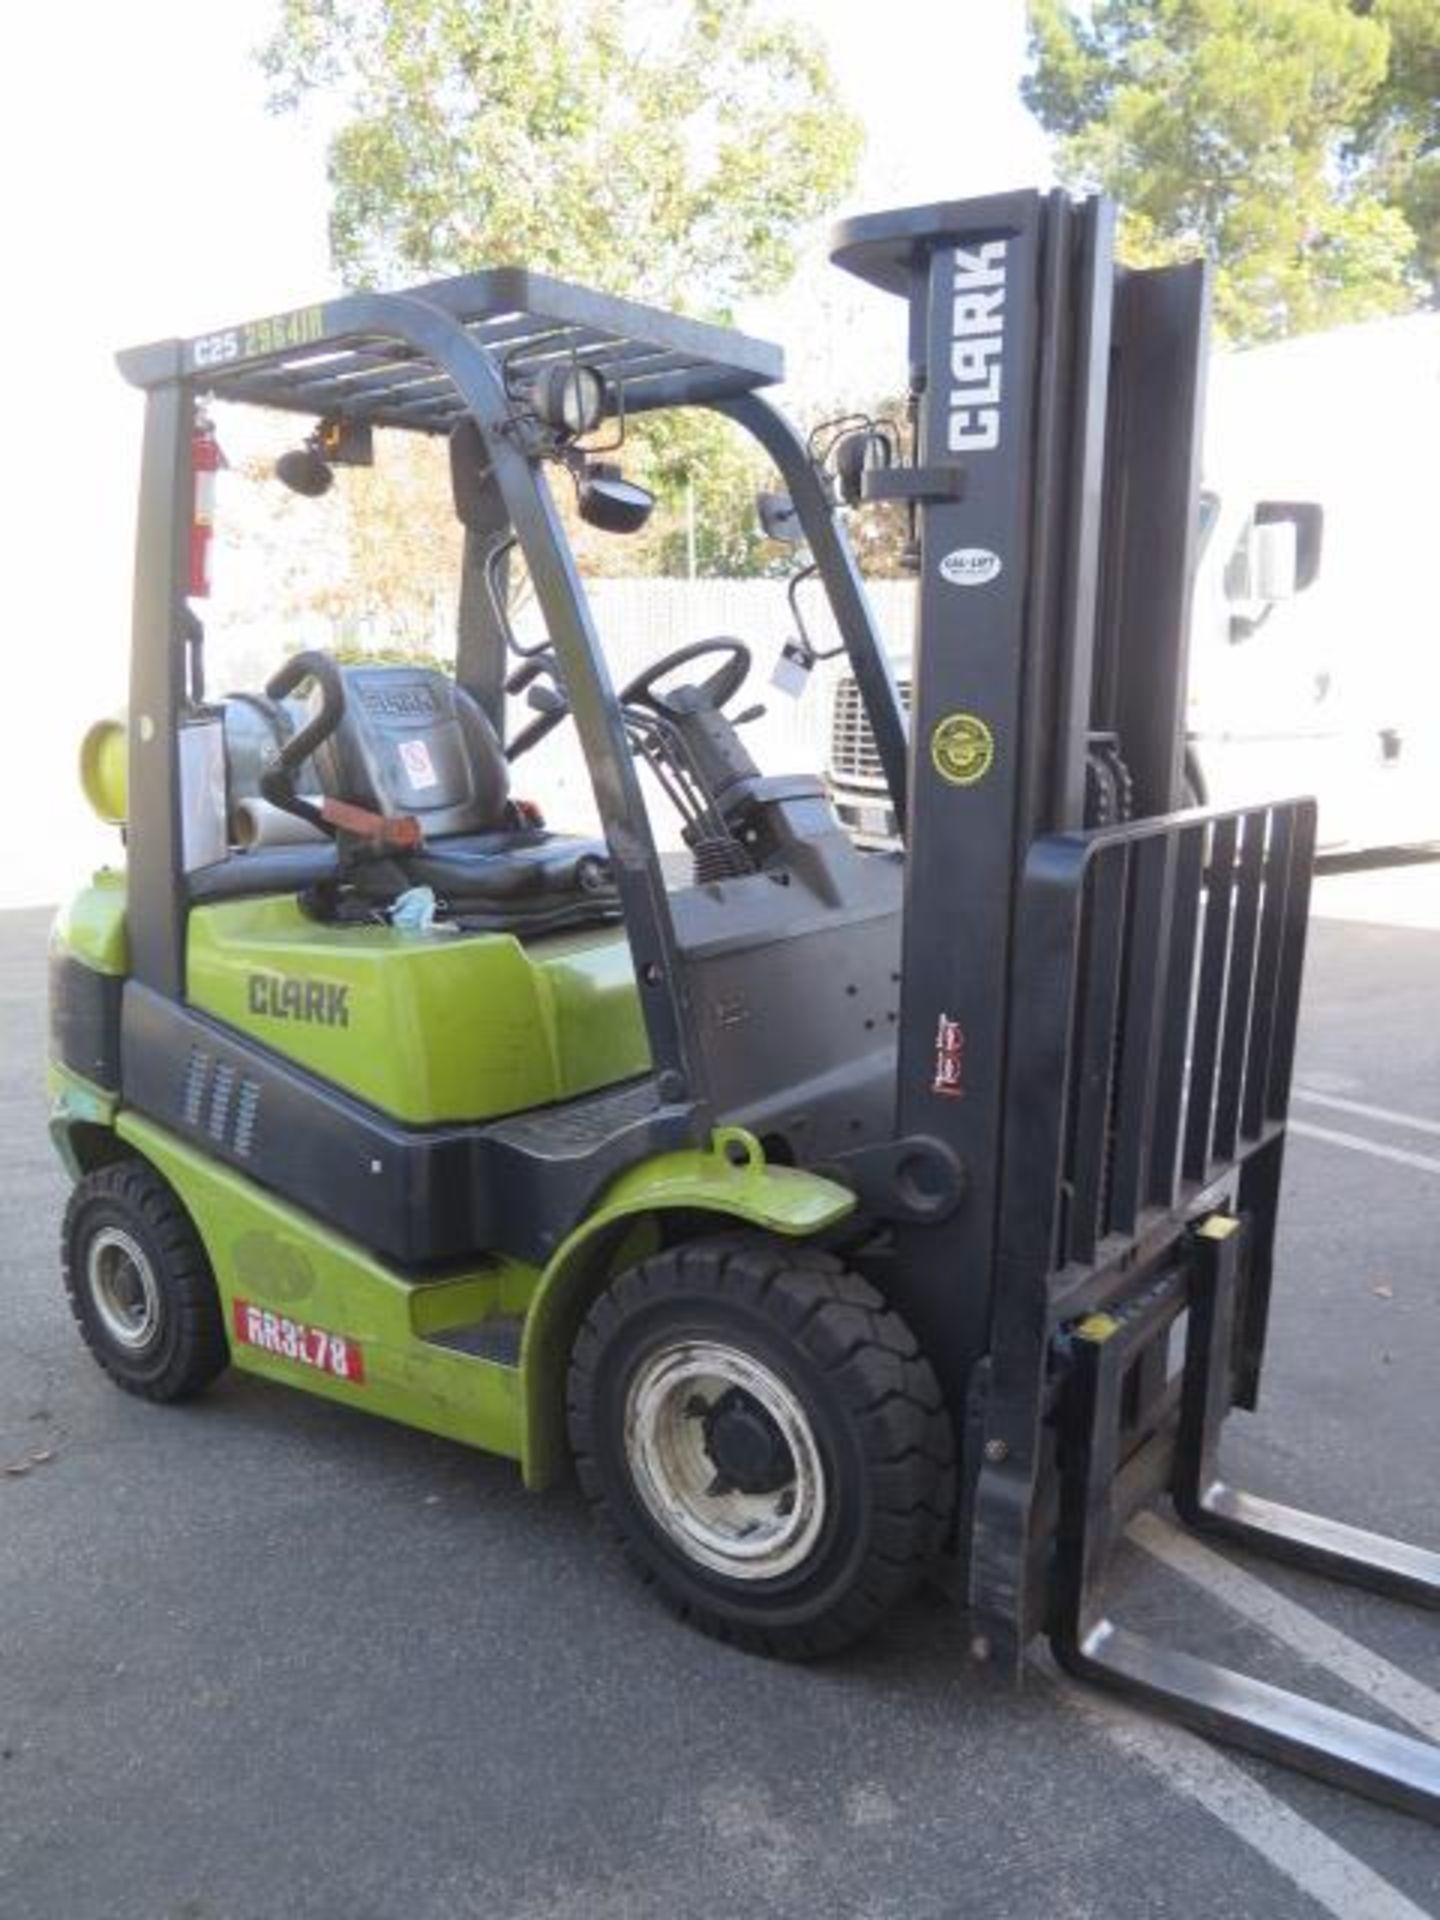 Clark C25 5000 Lb LPG Forklift s/n P-2321-0460-9862CNF w/ 3-Stage, 189" Lift, Side Shift, SOLD AS IS - Image 2 of 18